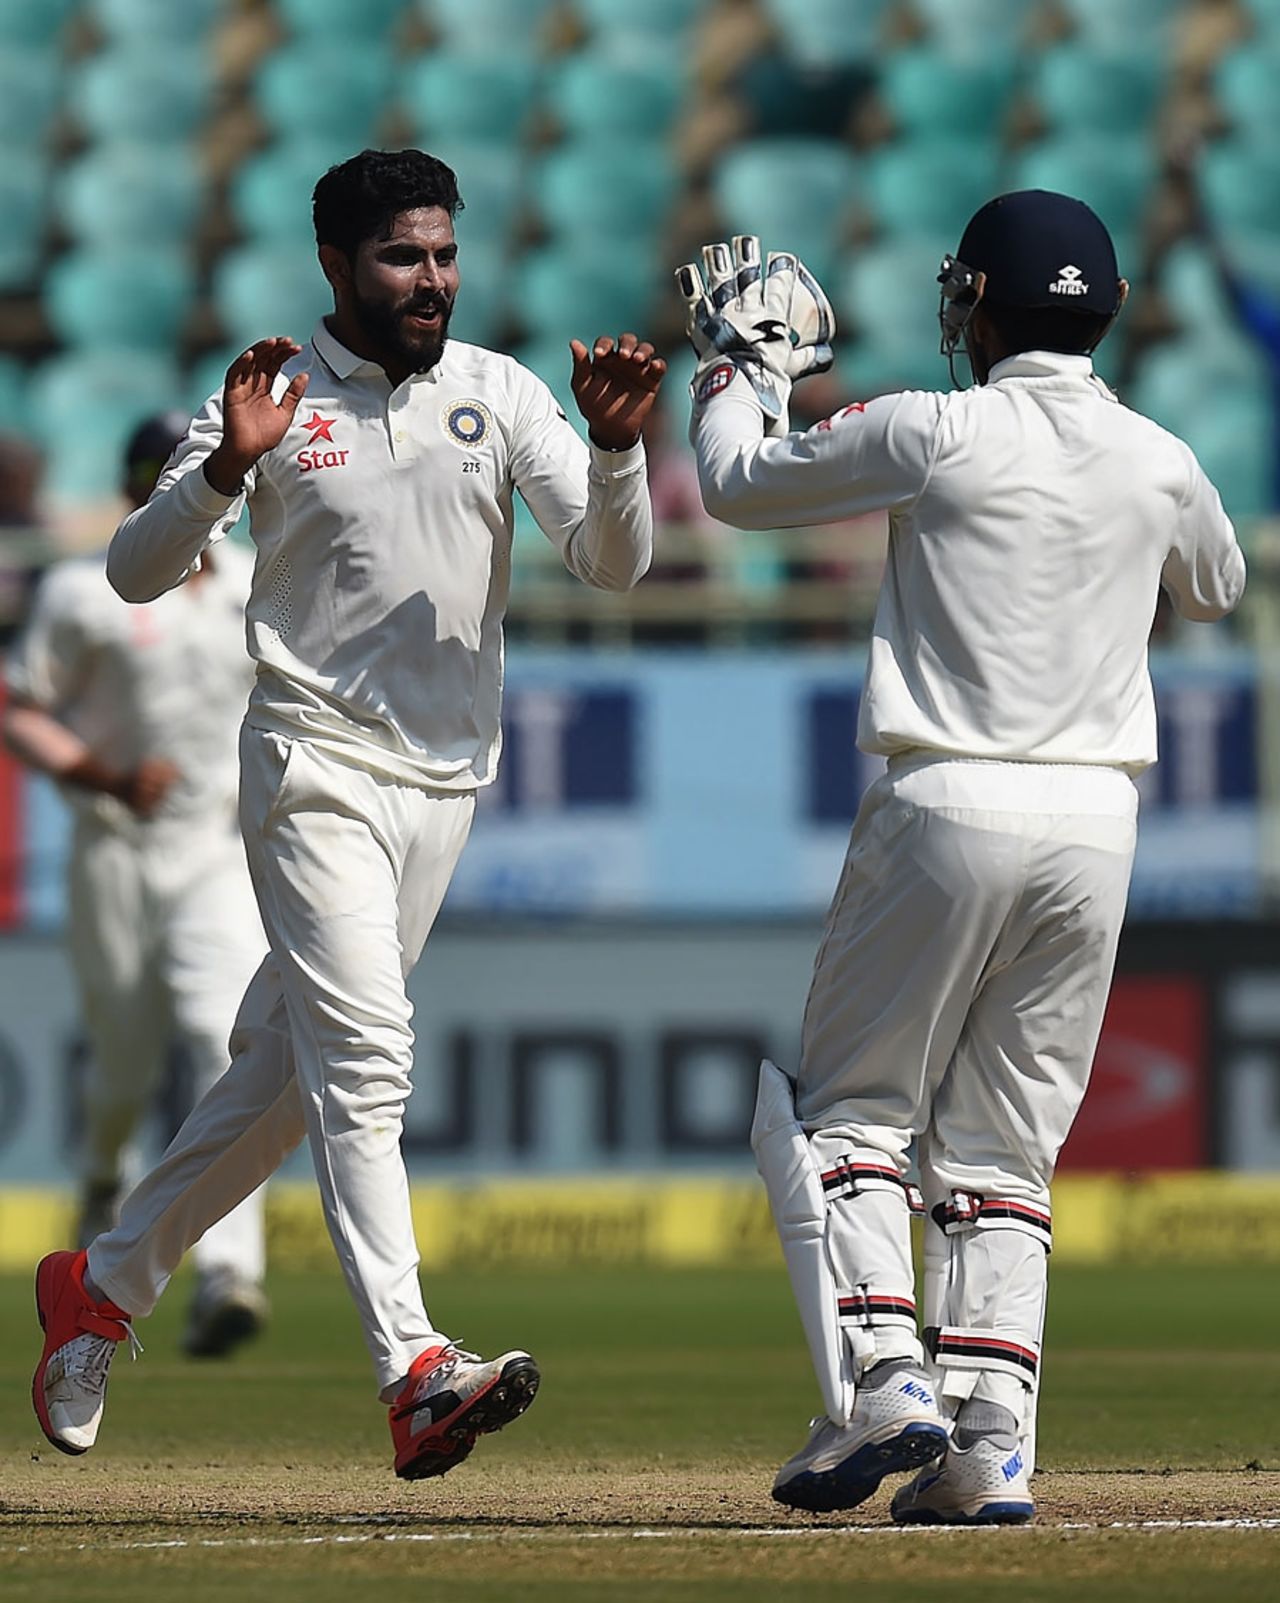 Ravi Jadeja removed Moeen Ali with one that spun and bounced, India v England, 2nd Test, Visakhapatnam, 5th day, November 21, 2016